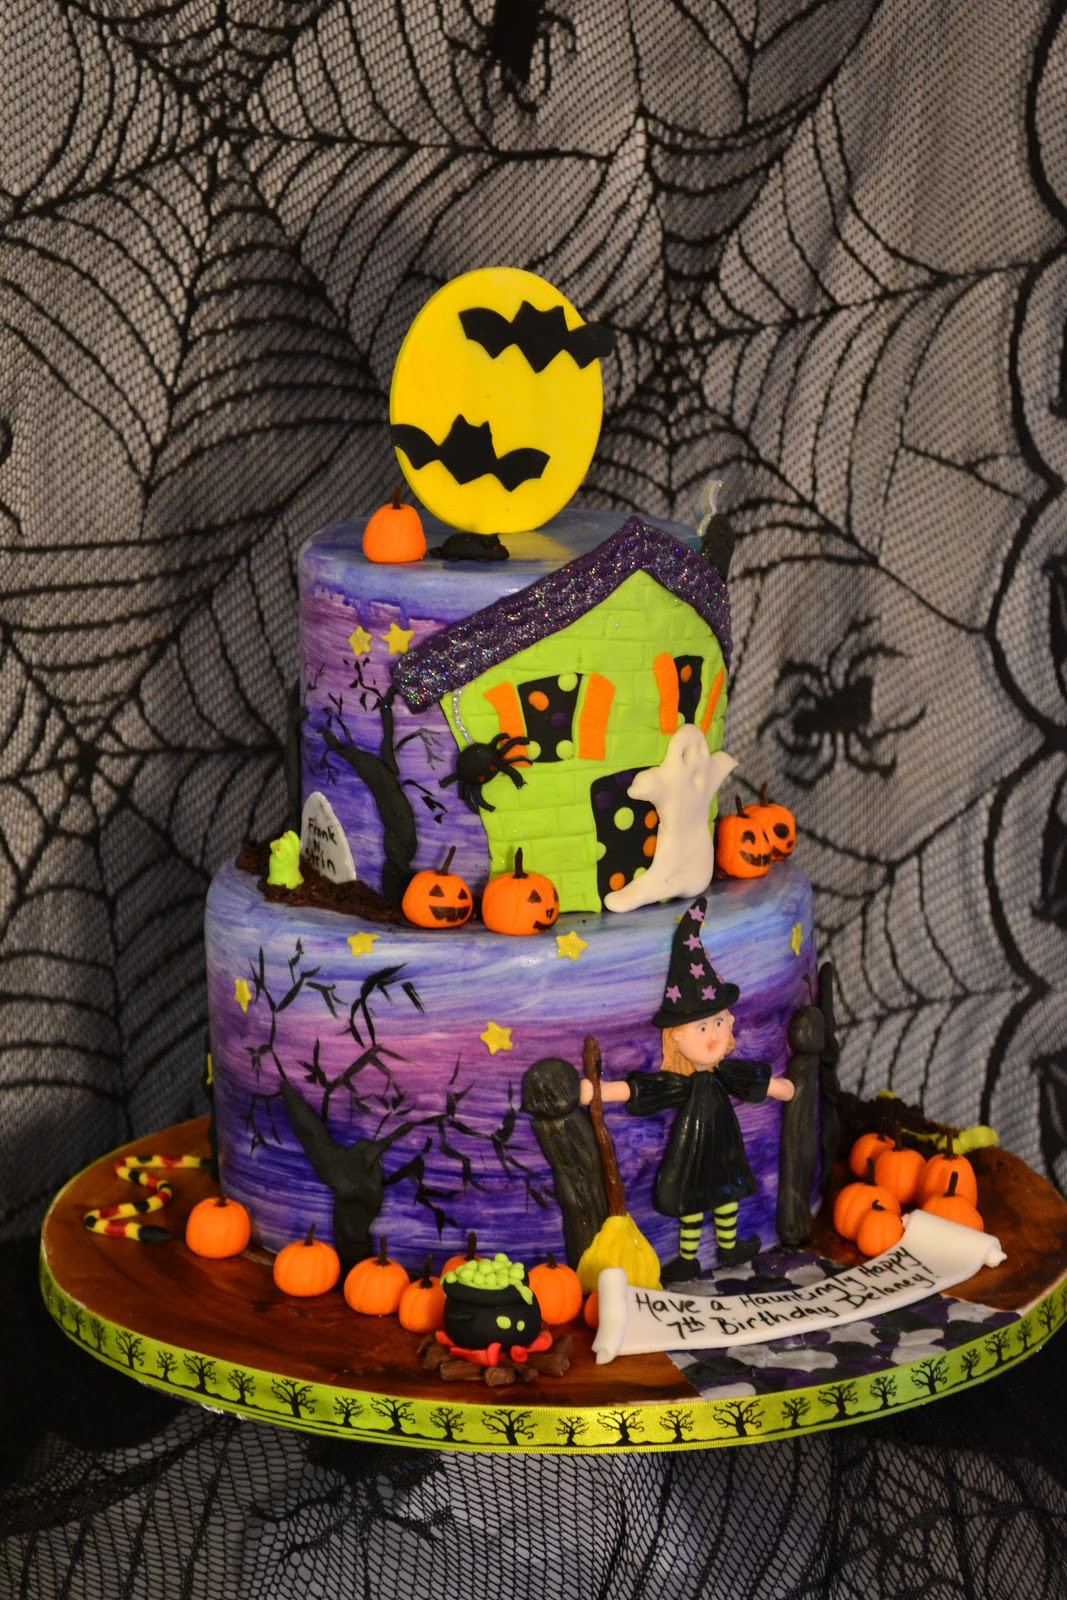 Halloween Birthday Cupcakes
 Oh just put a cupcake in it Halloween birthday cake